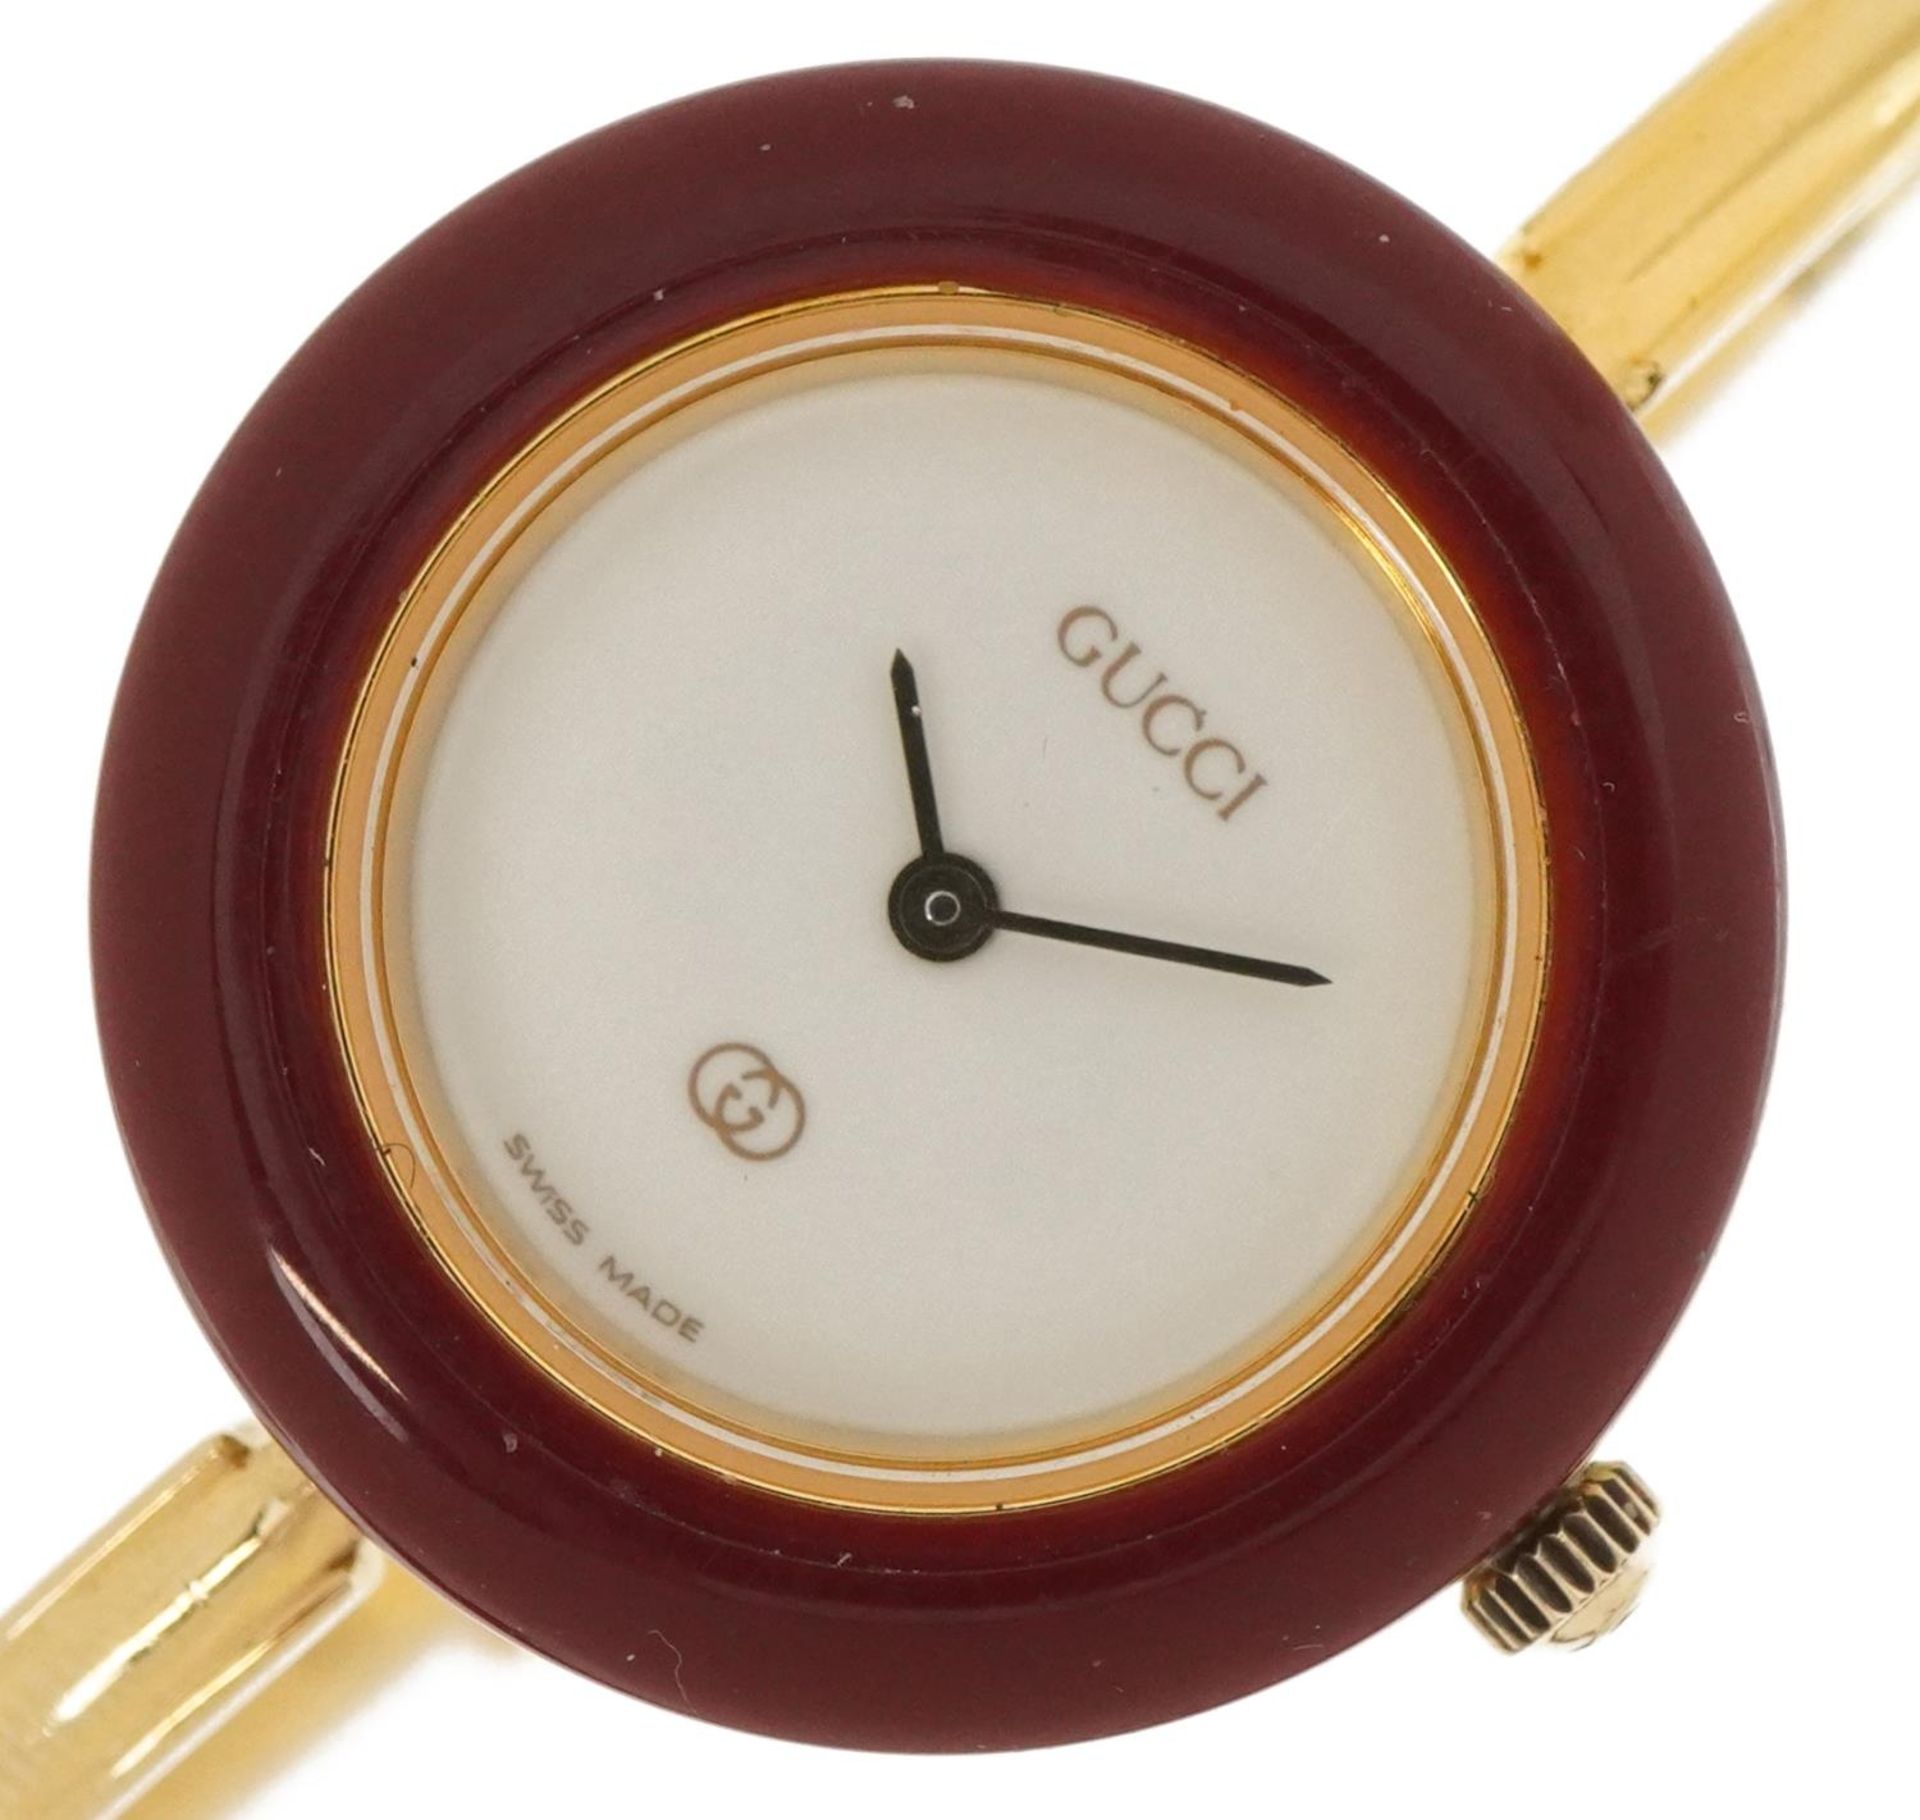 Gucci, ladies Gucci wristwatch, the case numbered 1100-L, 26mm in diameter : For further information